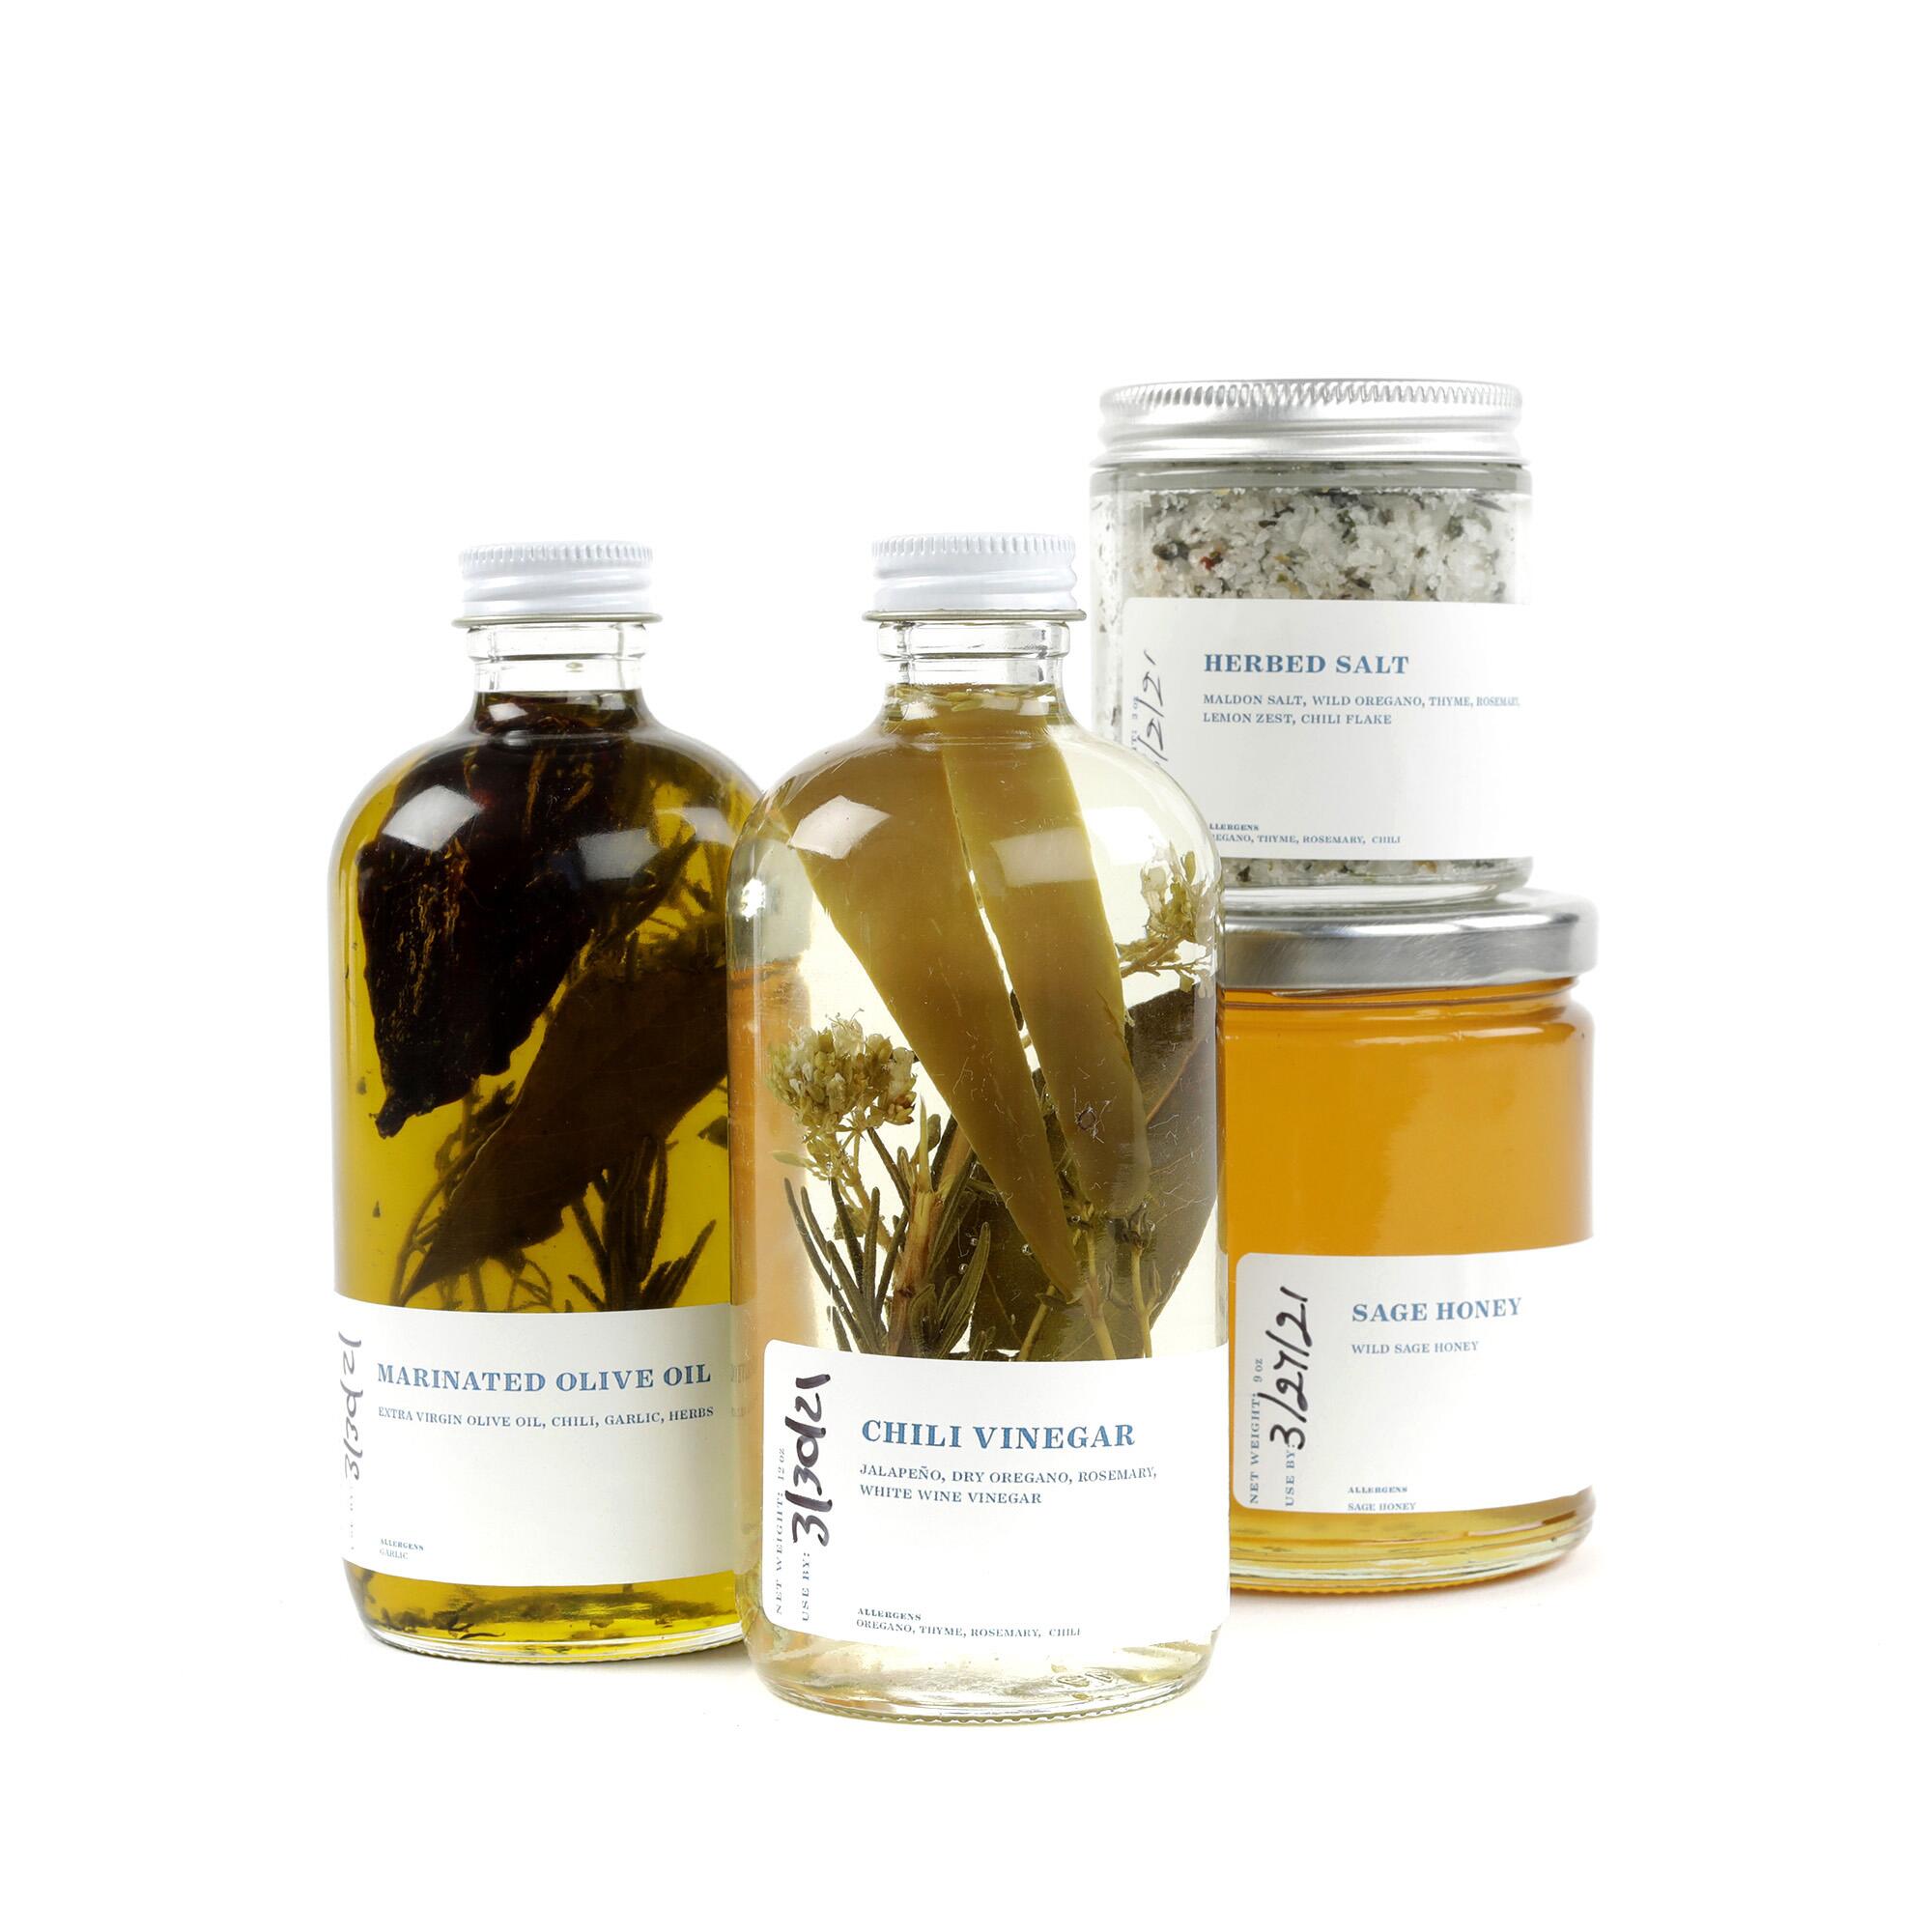 This gift box includes marinated olive oil, herbed salt, California sage honey and chili vinegar.